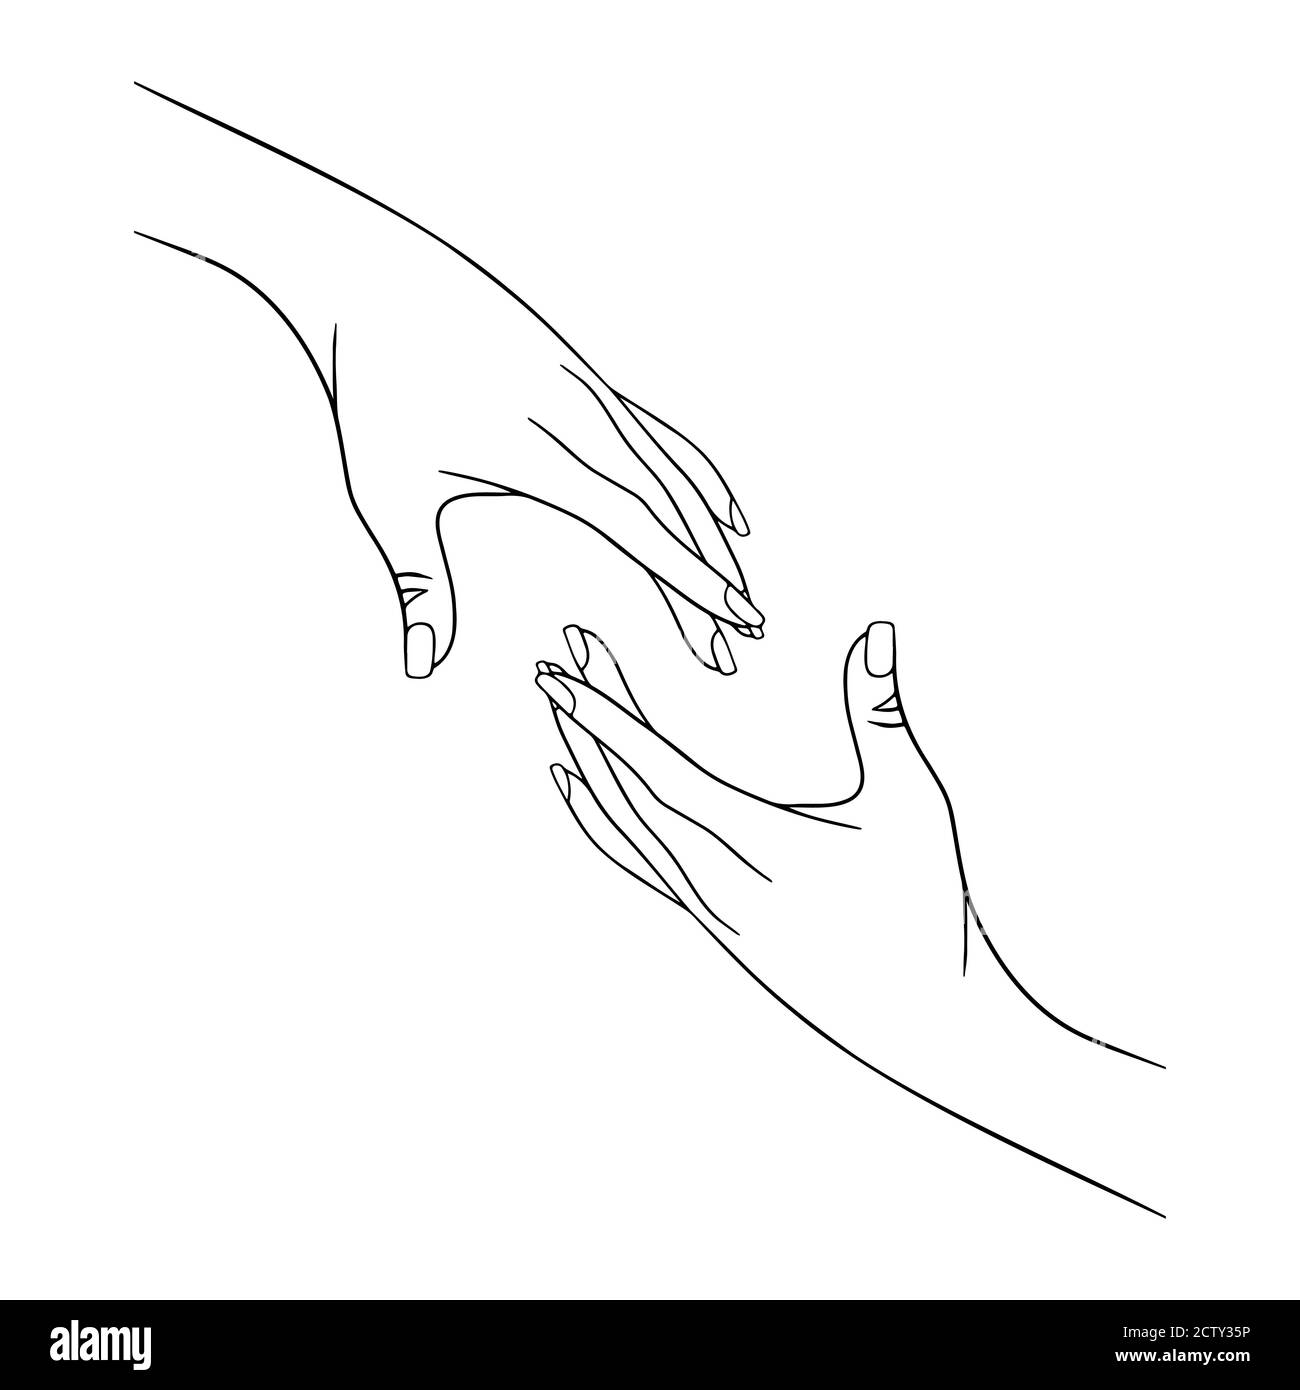 Two Hands Reaching For Each Other Sketch